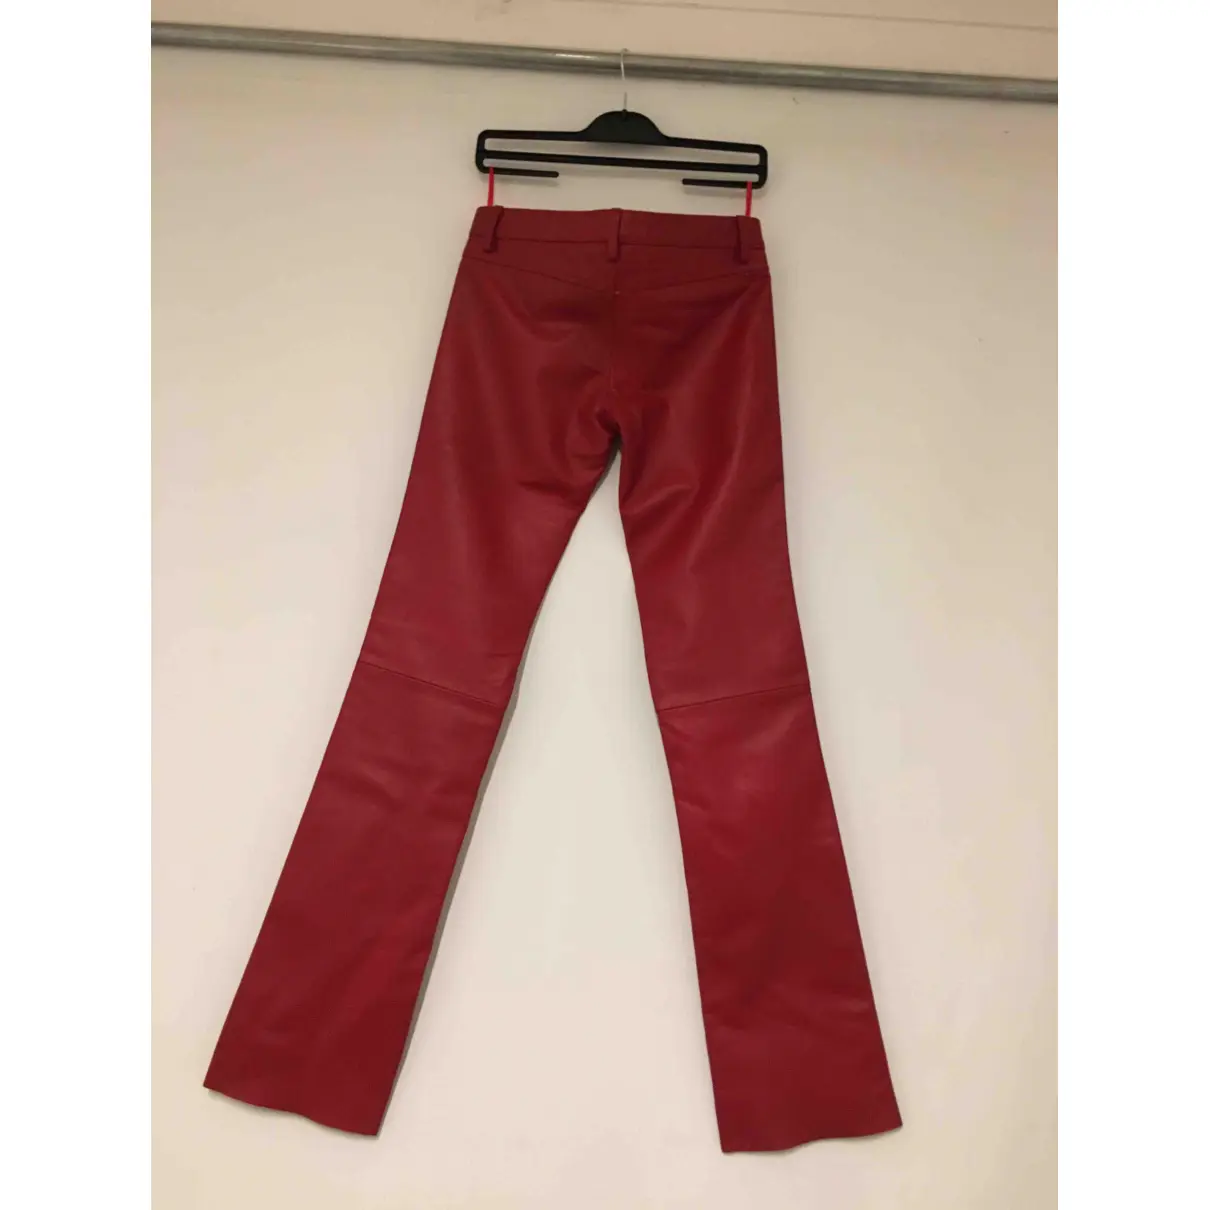 Buy Unknown Leather trousers online